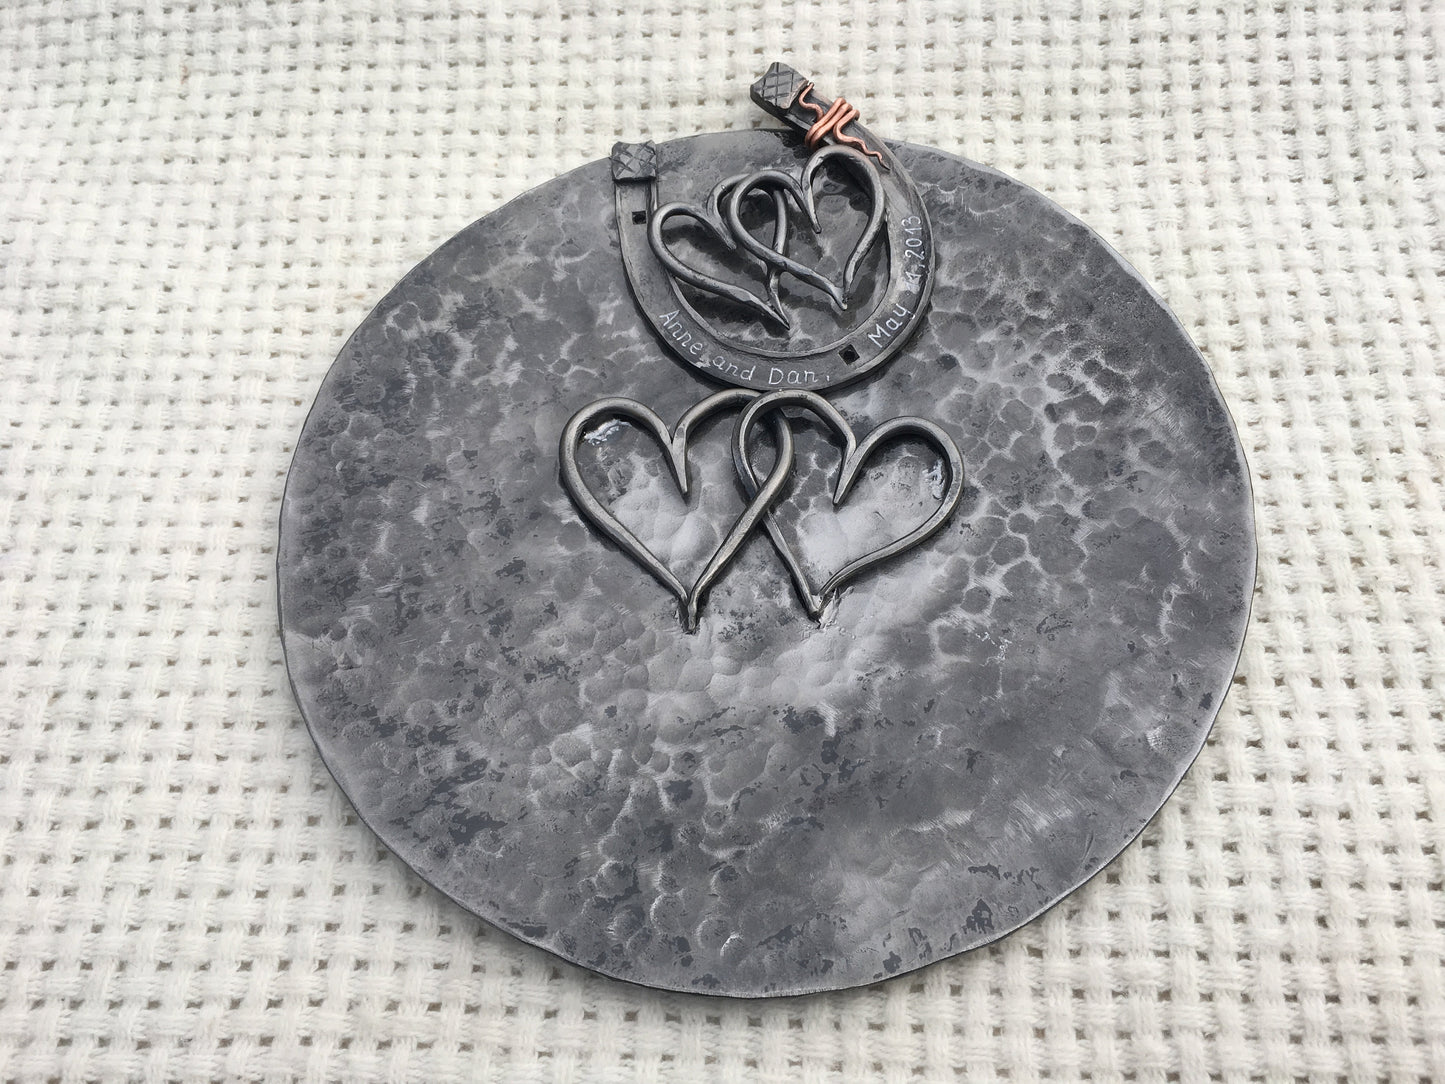 Iron bowl, iron horse shoe, 6th anniversary gift, iron anniversary, 6 year anniversary, iron hearts, iron gift, personalized bowl,steel bowl